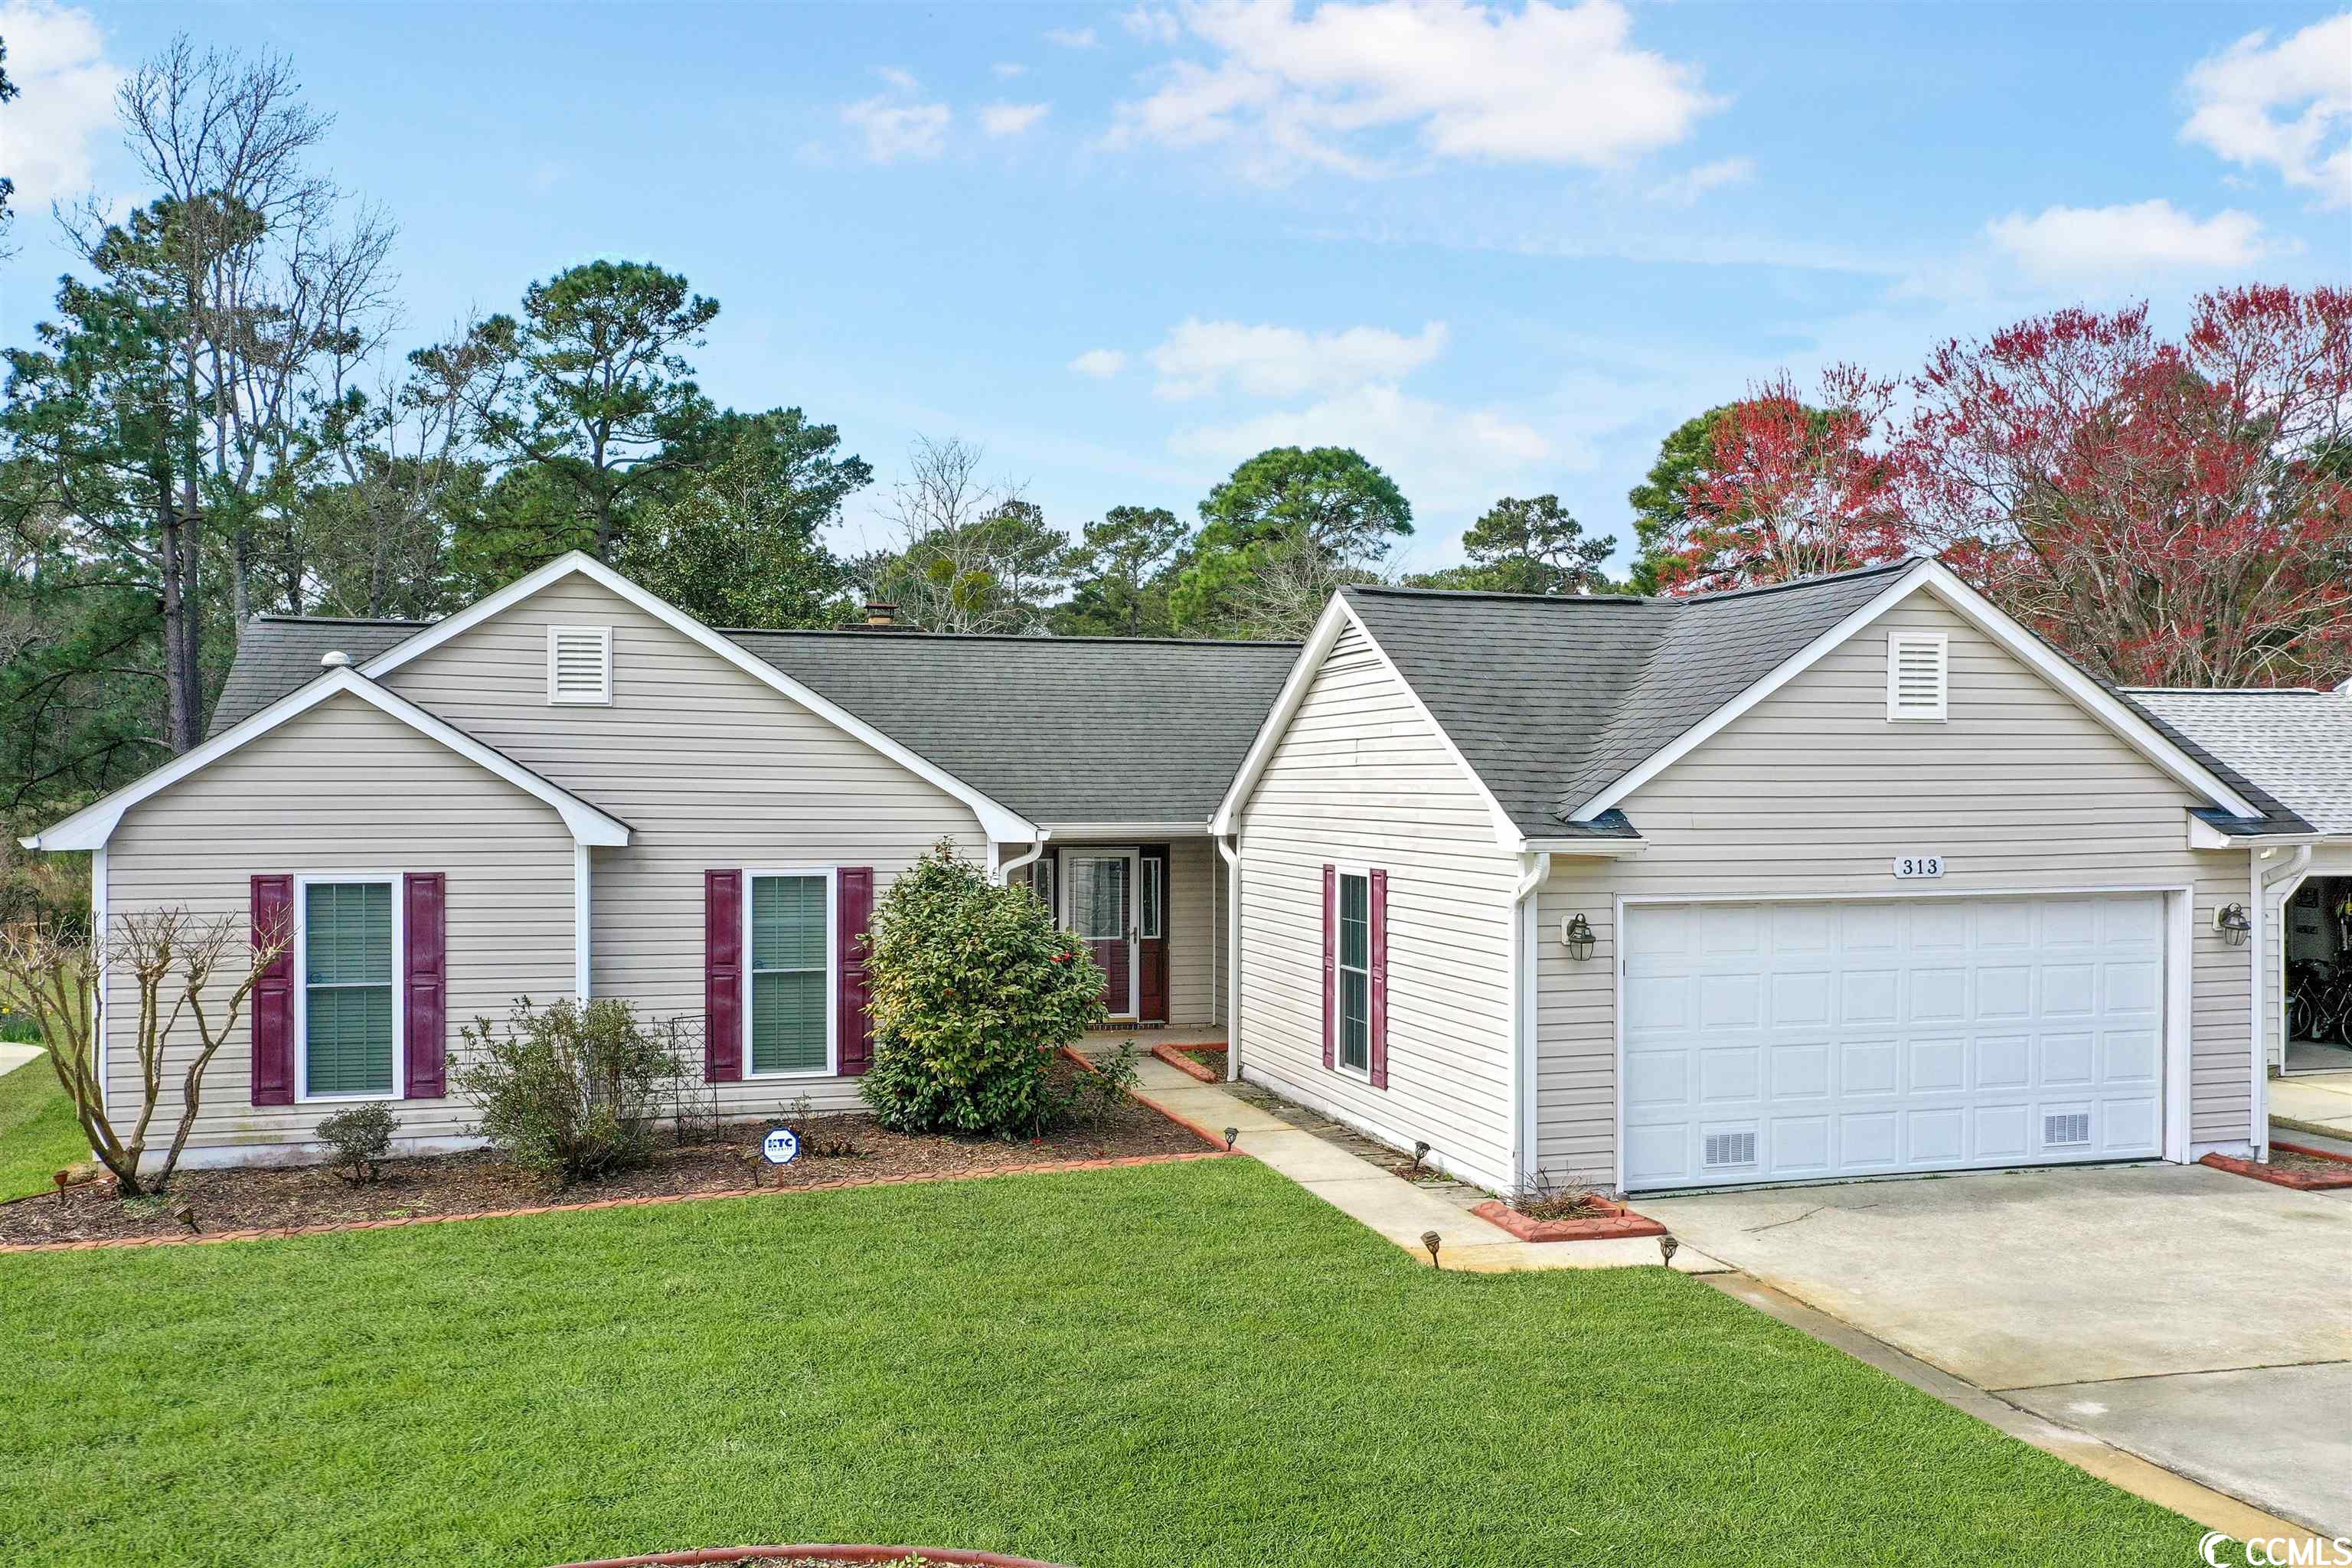 313 Mourning Dove Ln. Murrells Inlet, SC 29576